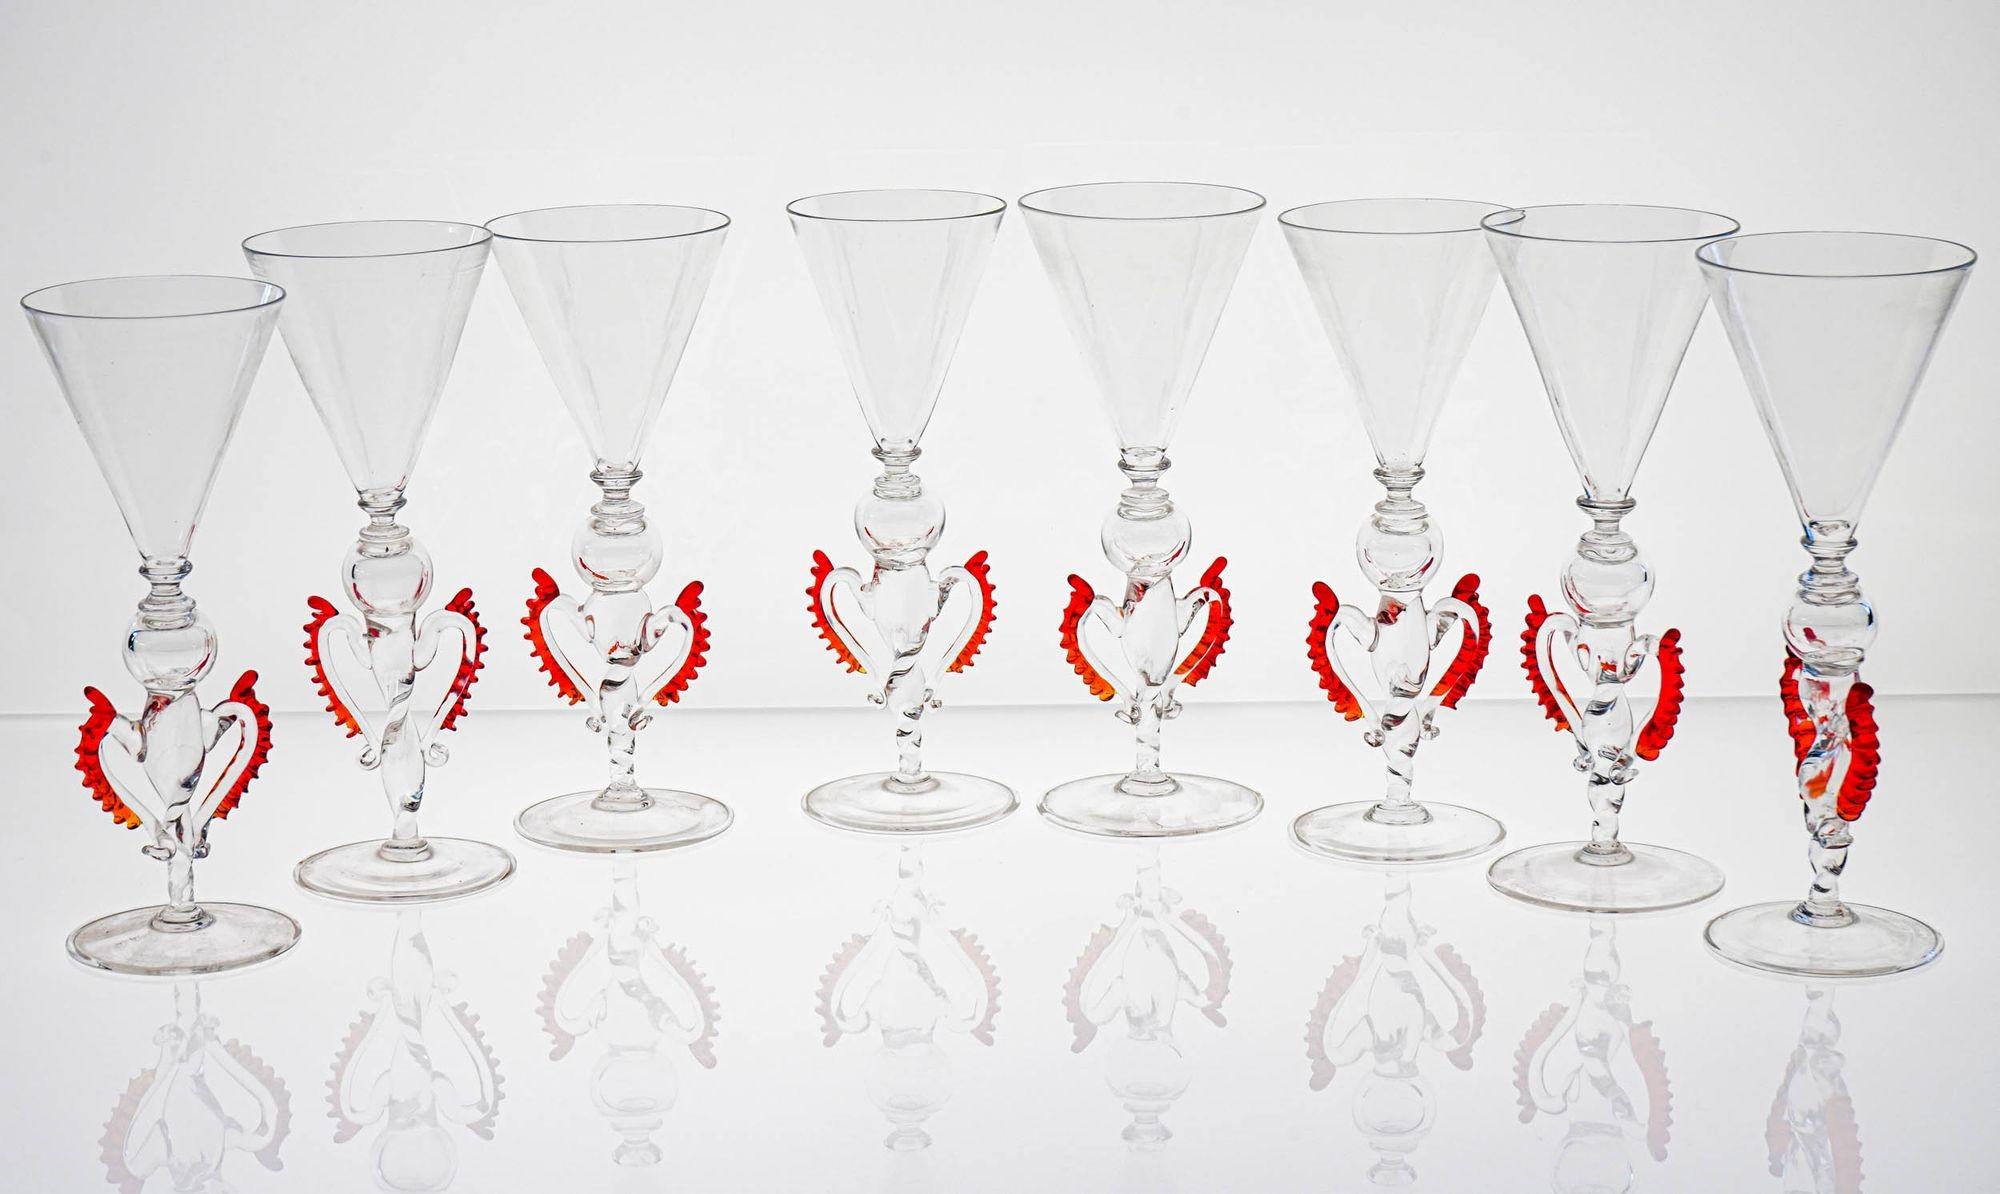 Set of 8 Classic Cenedese Murano Glass Goblets Tipetti, clear with red accents (Moderne der Mitte des Jahrhunderts) im Angebot